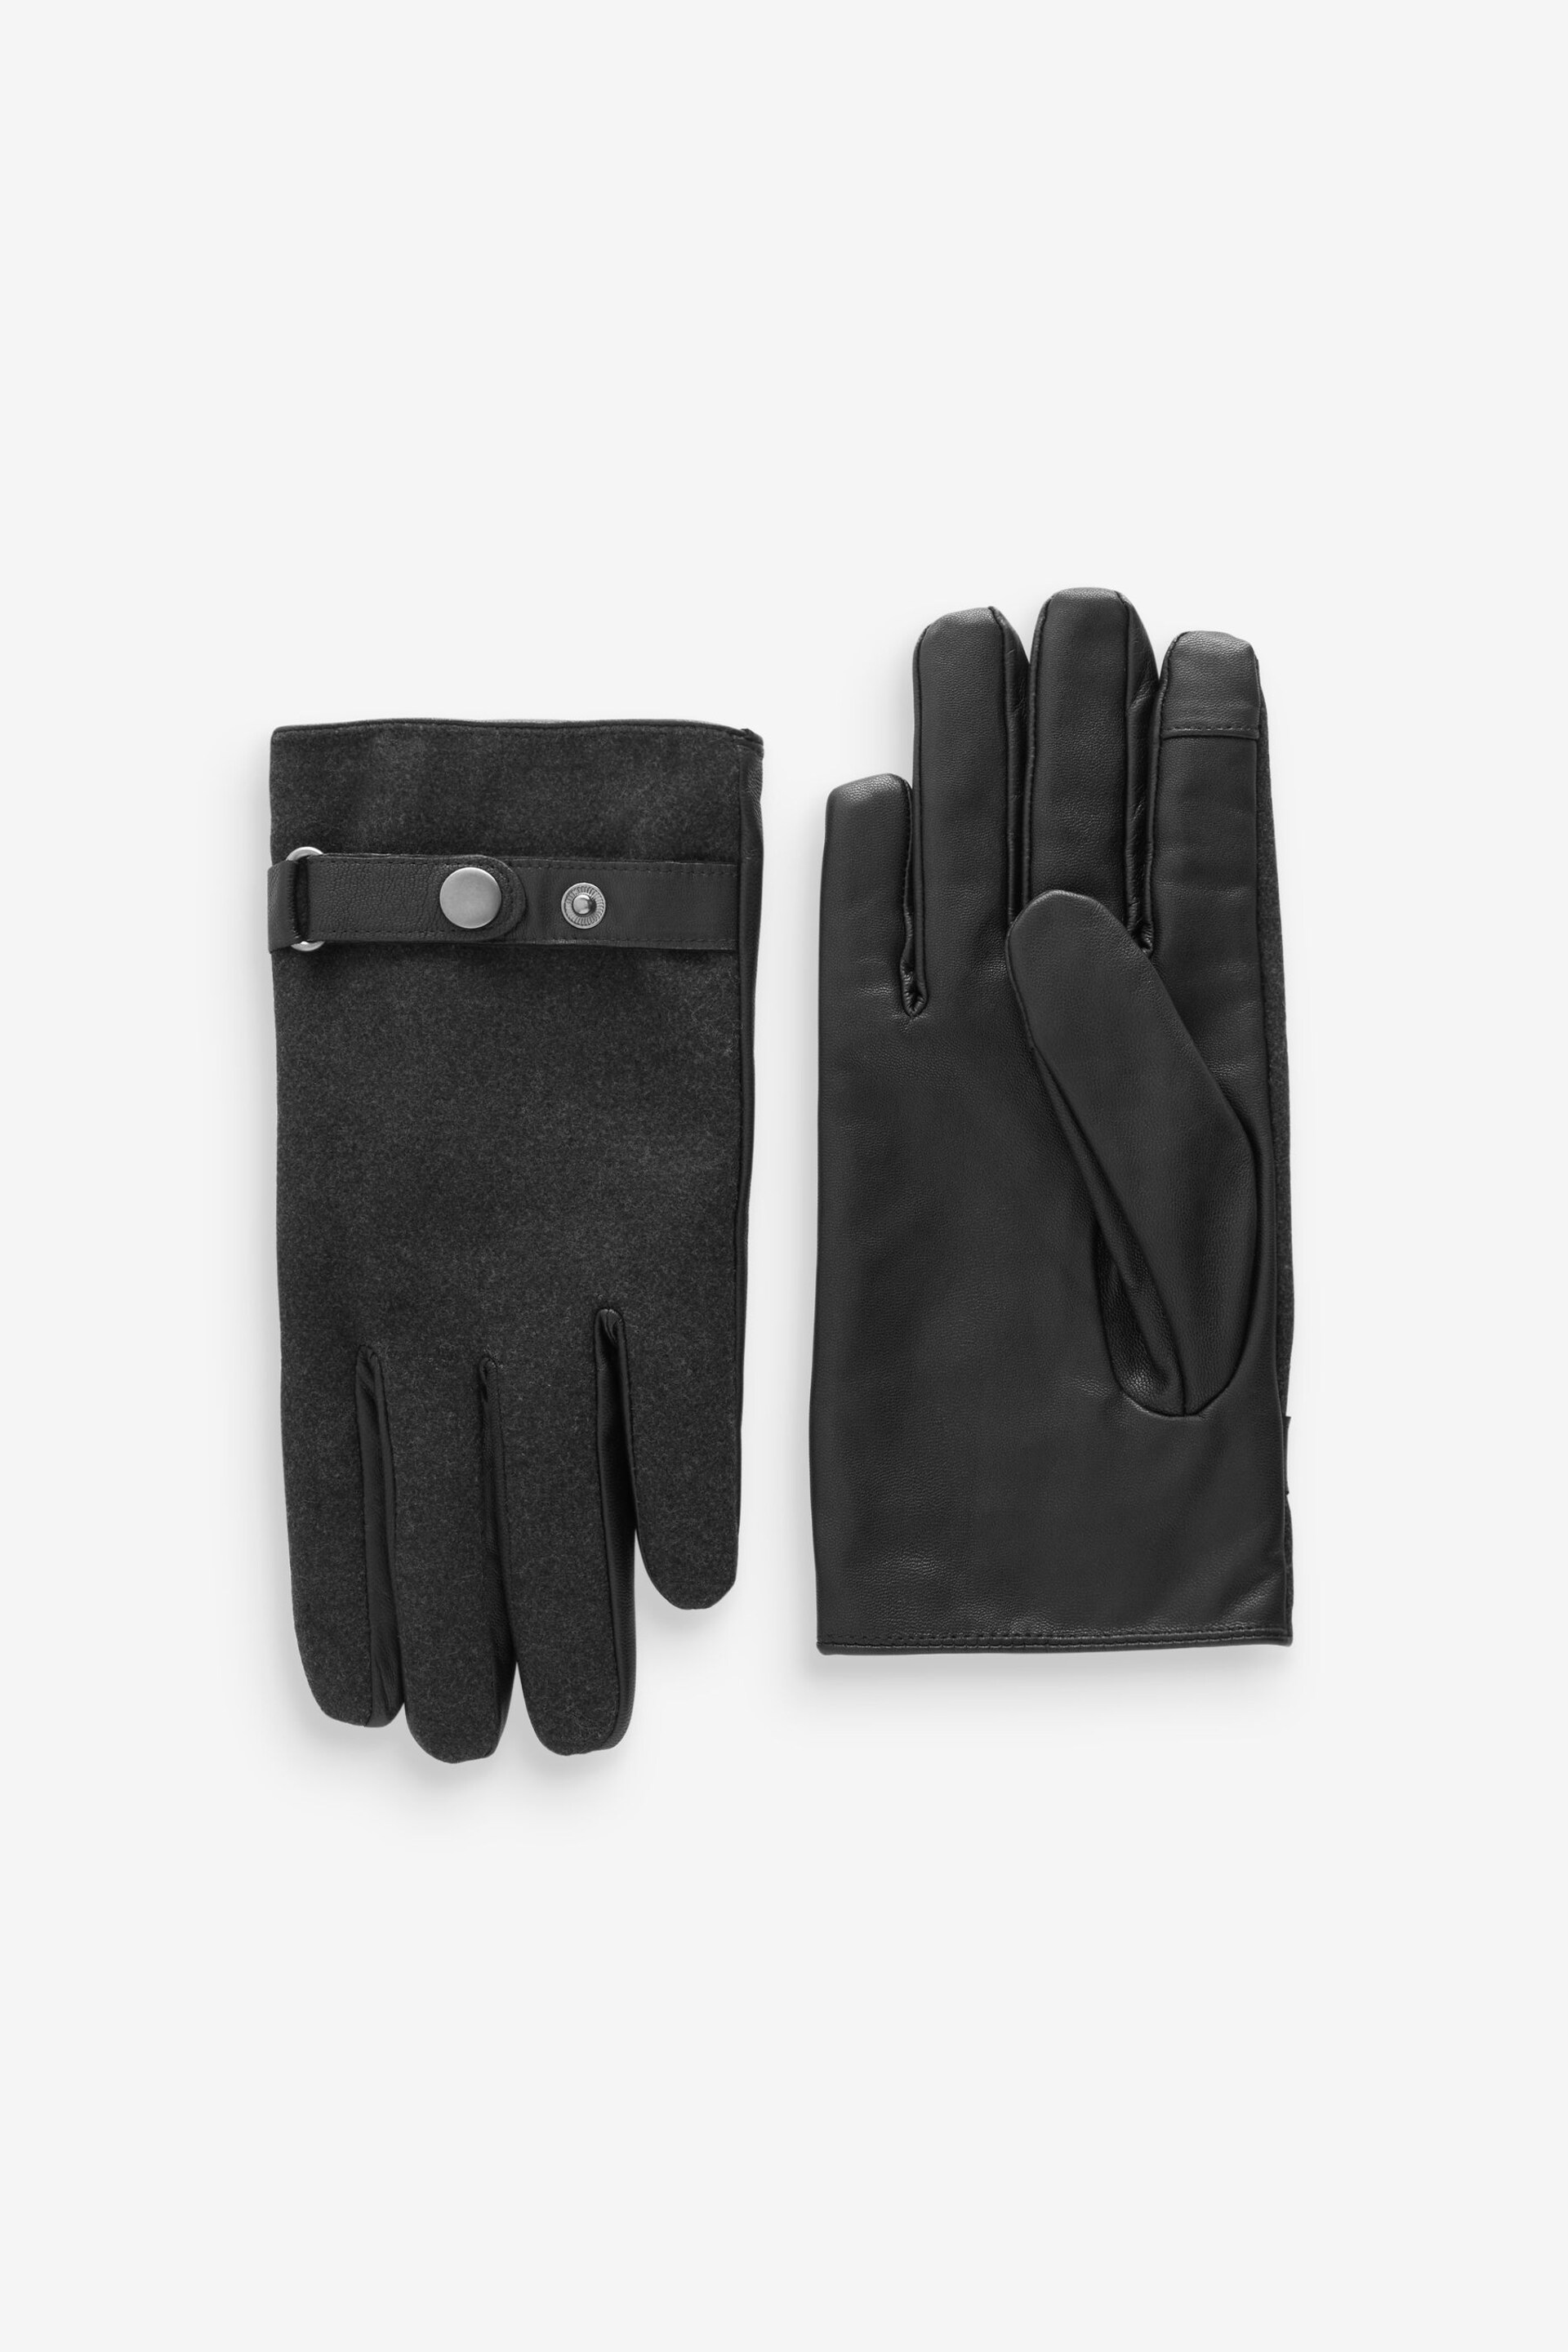 Charcoal Grey Leather Gloves - Image 2 of 3